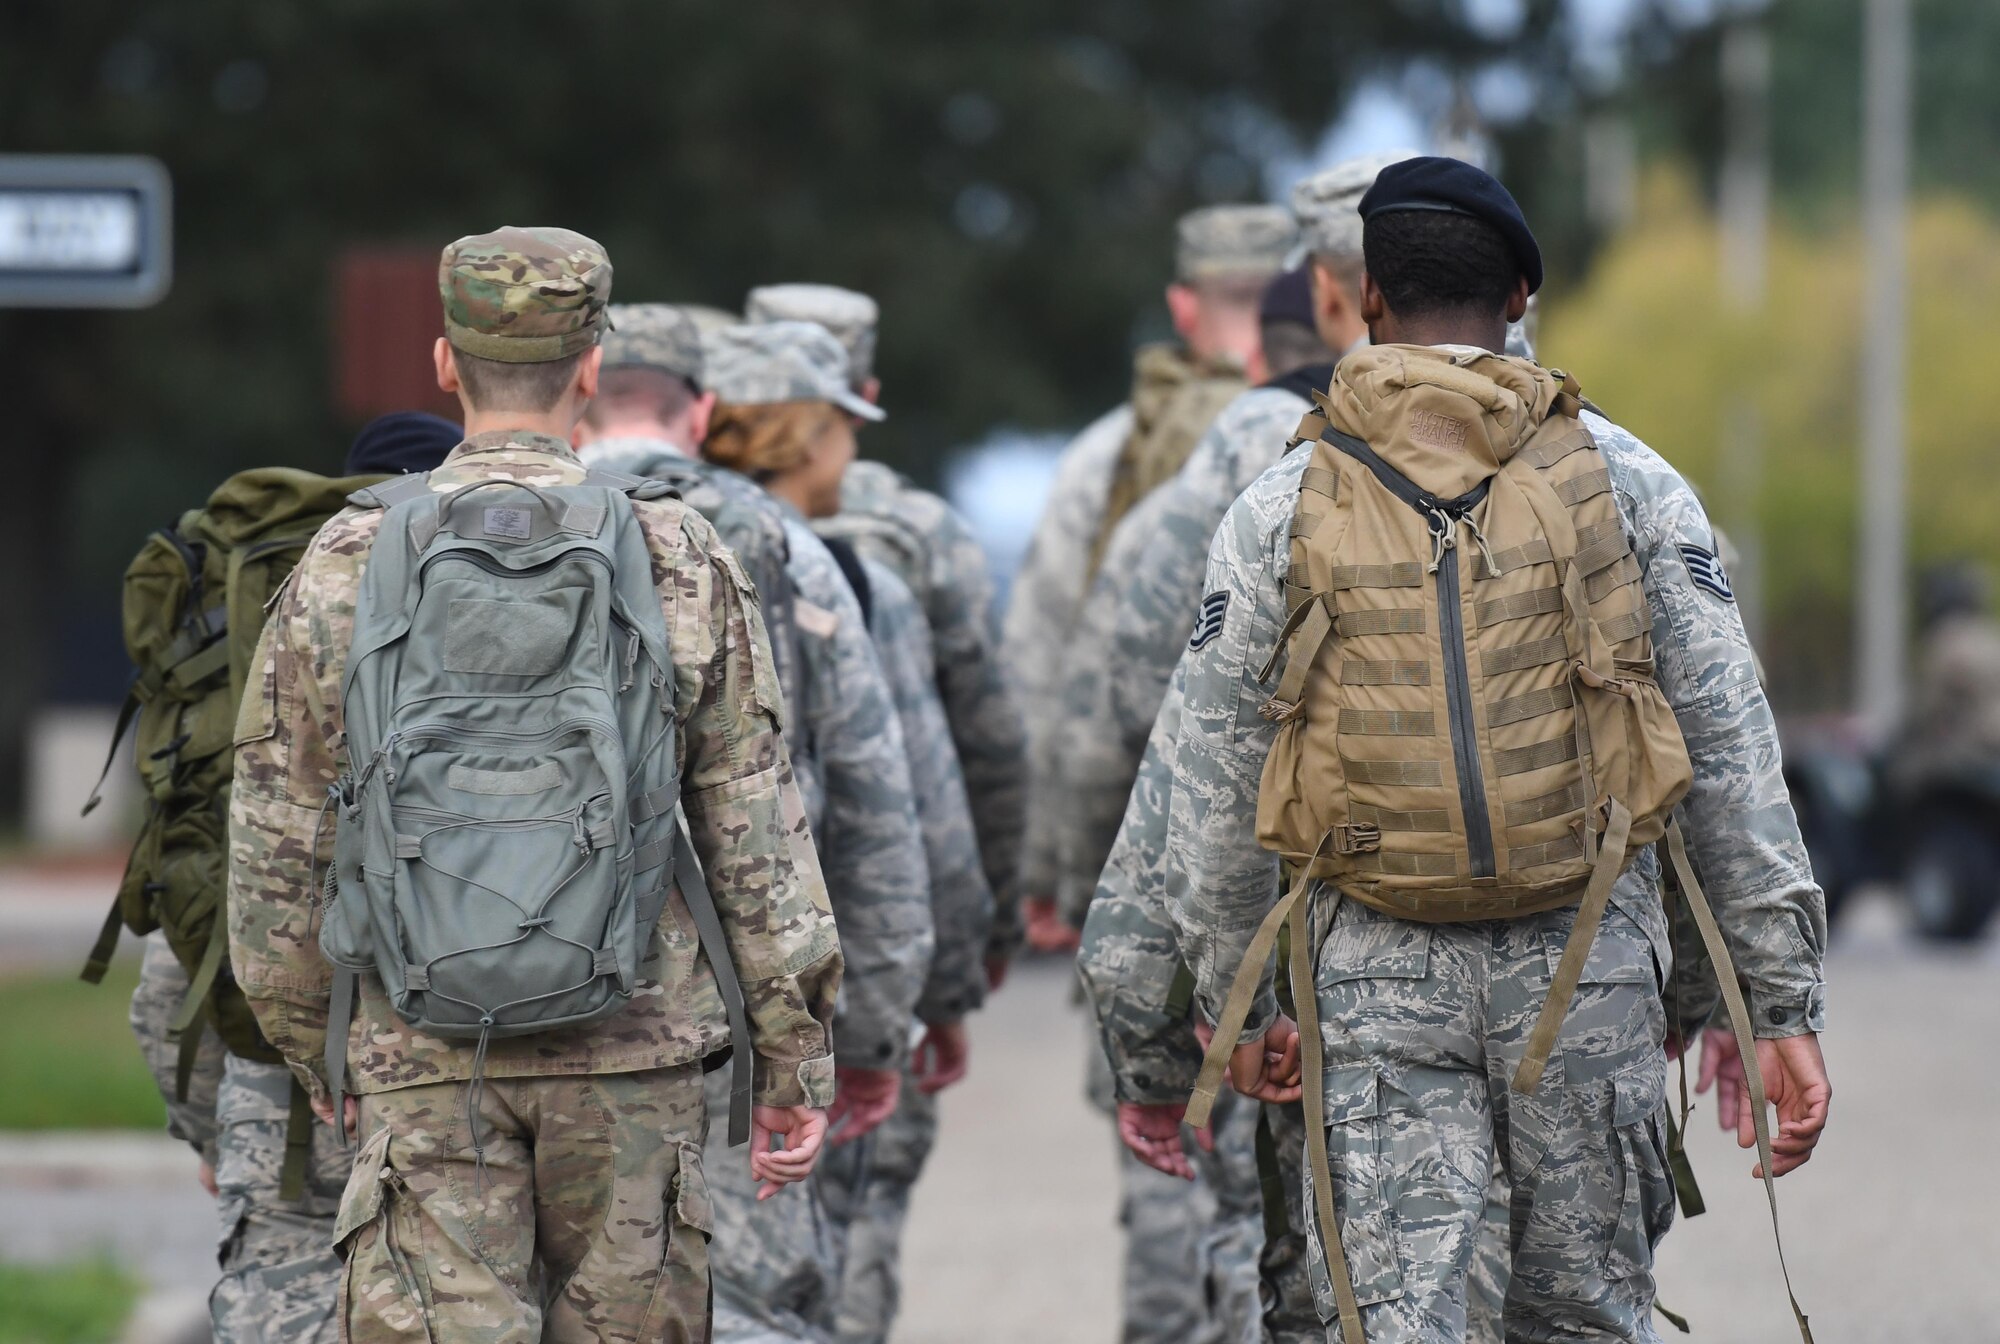 Members of the 81st Security Forces Squadron participate in the 81st SFS Veterans Day Ruck March at Keesler Air Force Base, Mississippi, Nov. 9, 2018. The 6.8 mile ruck march was held in honor of all veterans and victims of war. (U.S. Air Force photo by Kemberly Groue)